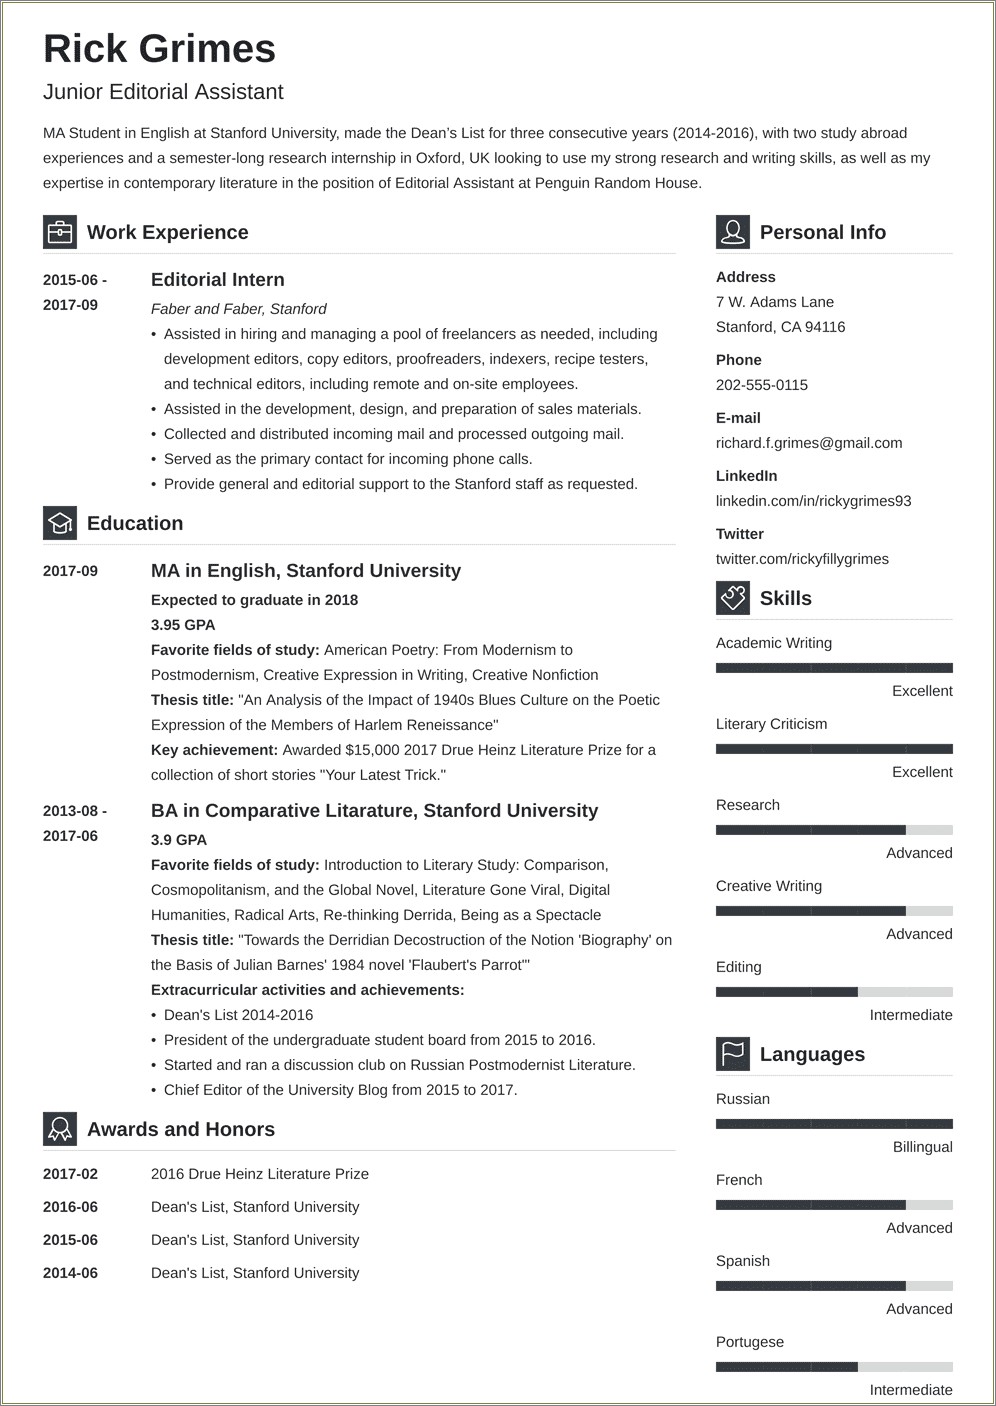 Resume Summary For An Entry Level Engineer